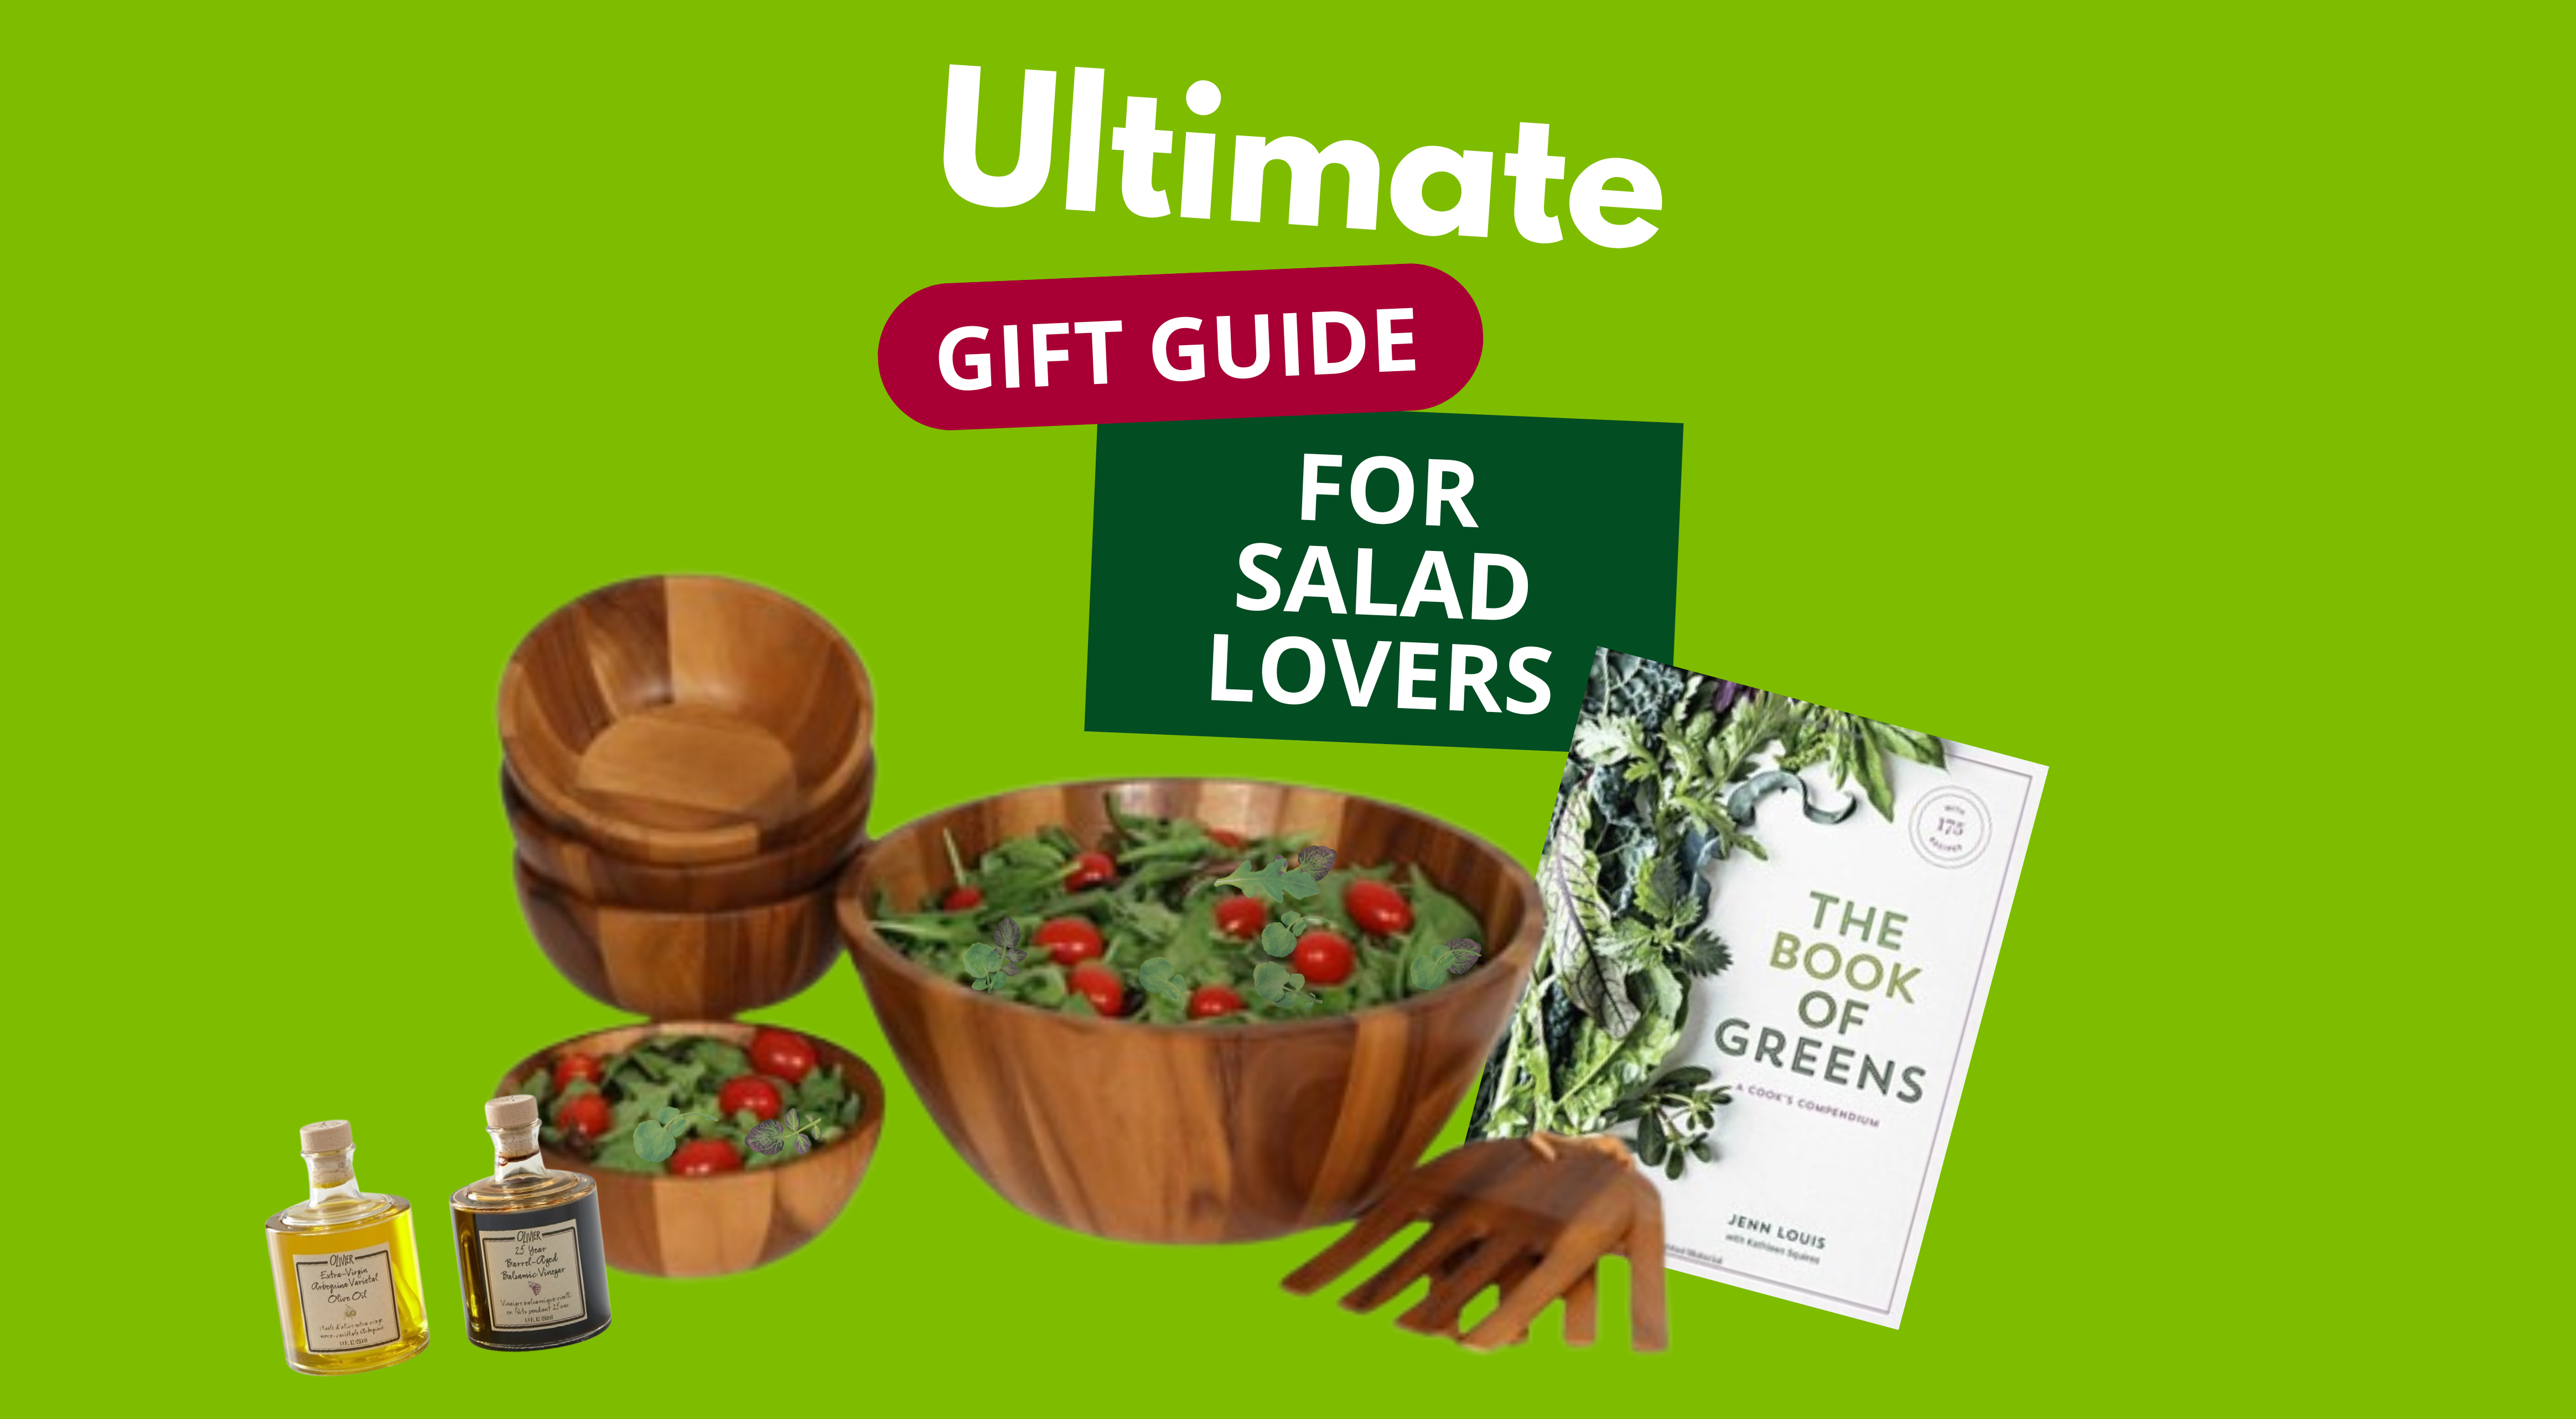 https://bwqualitygrowers.com/wp-content/uploads/2022/11/Gift-Guide-For-Salad-Lovers.png